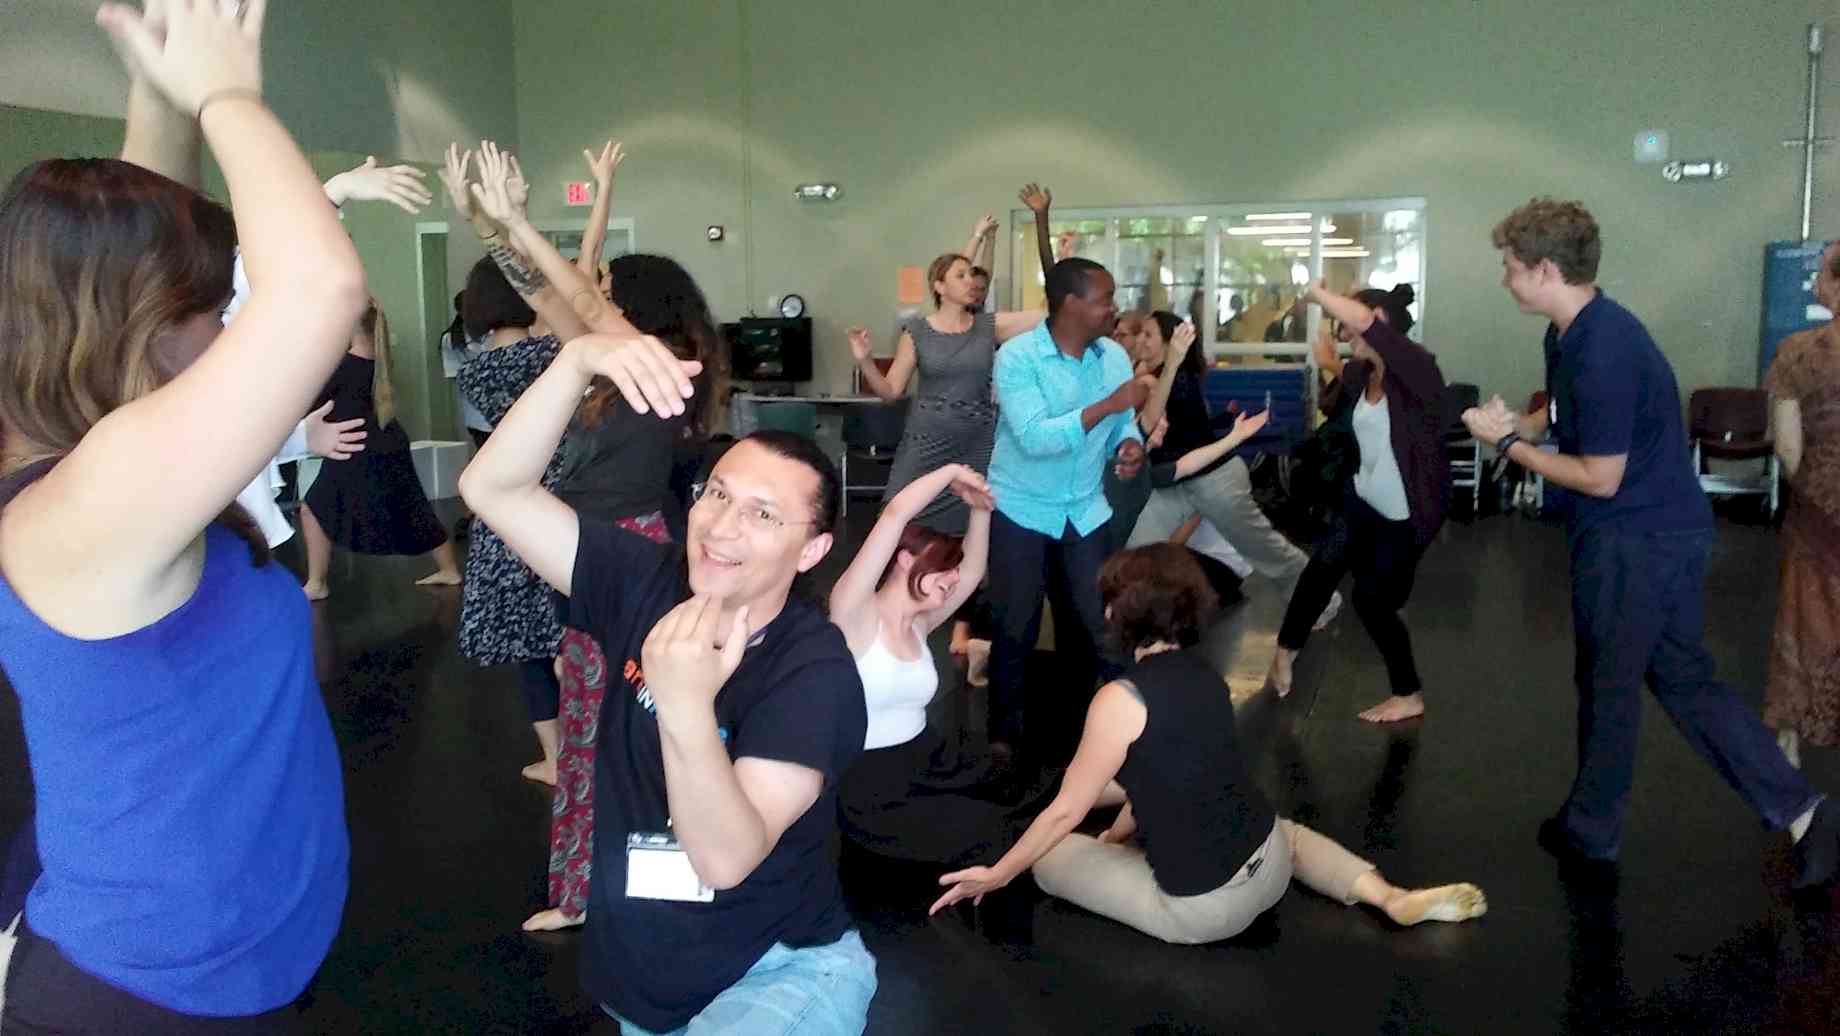 Participants from around the world explore movement together.